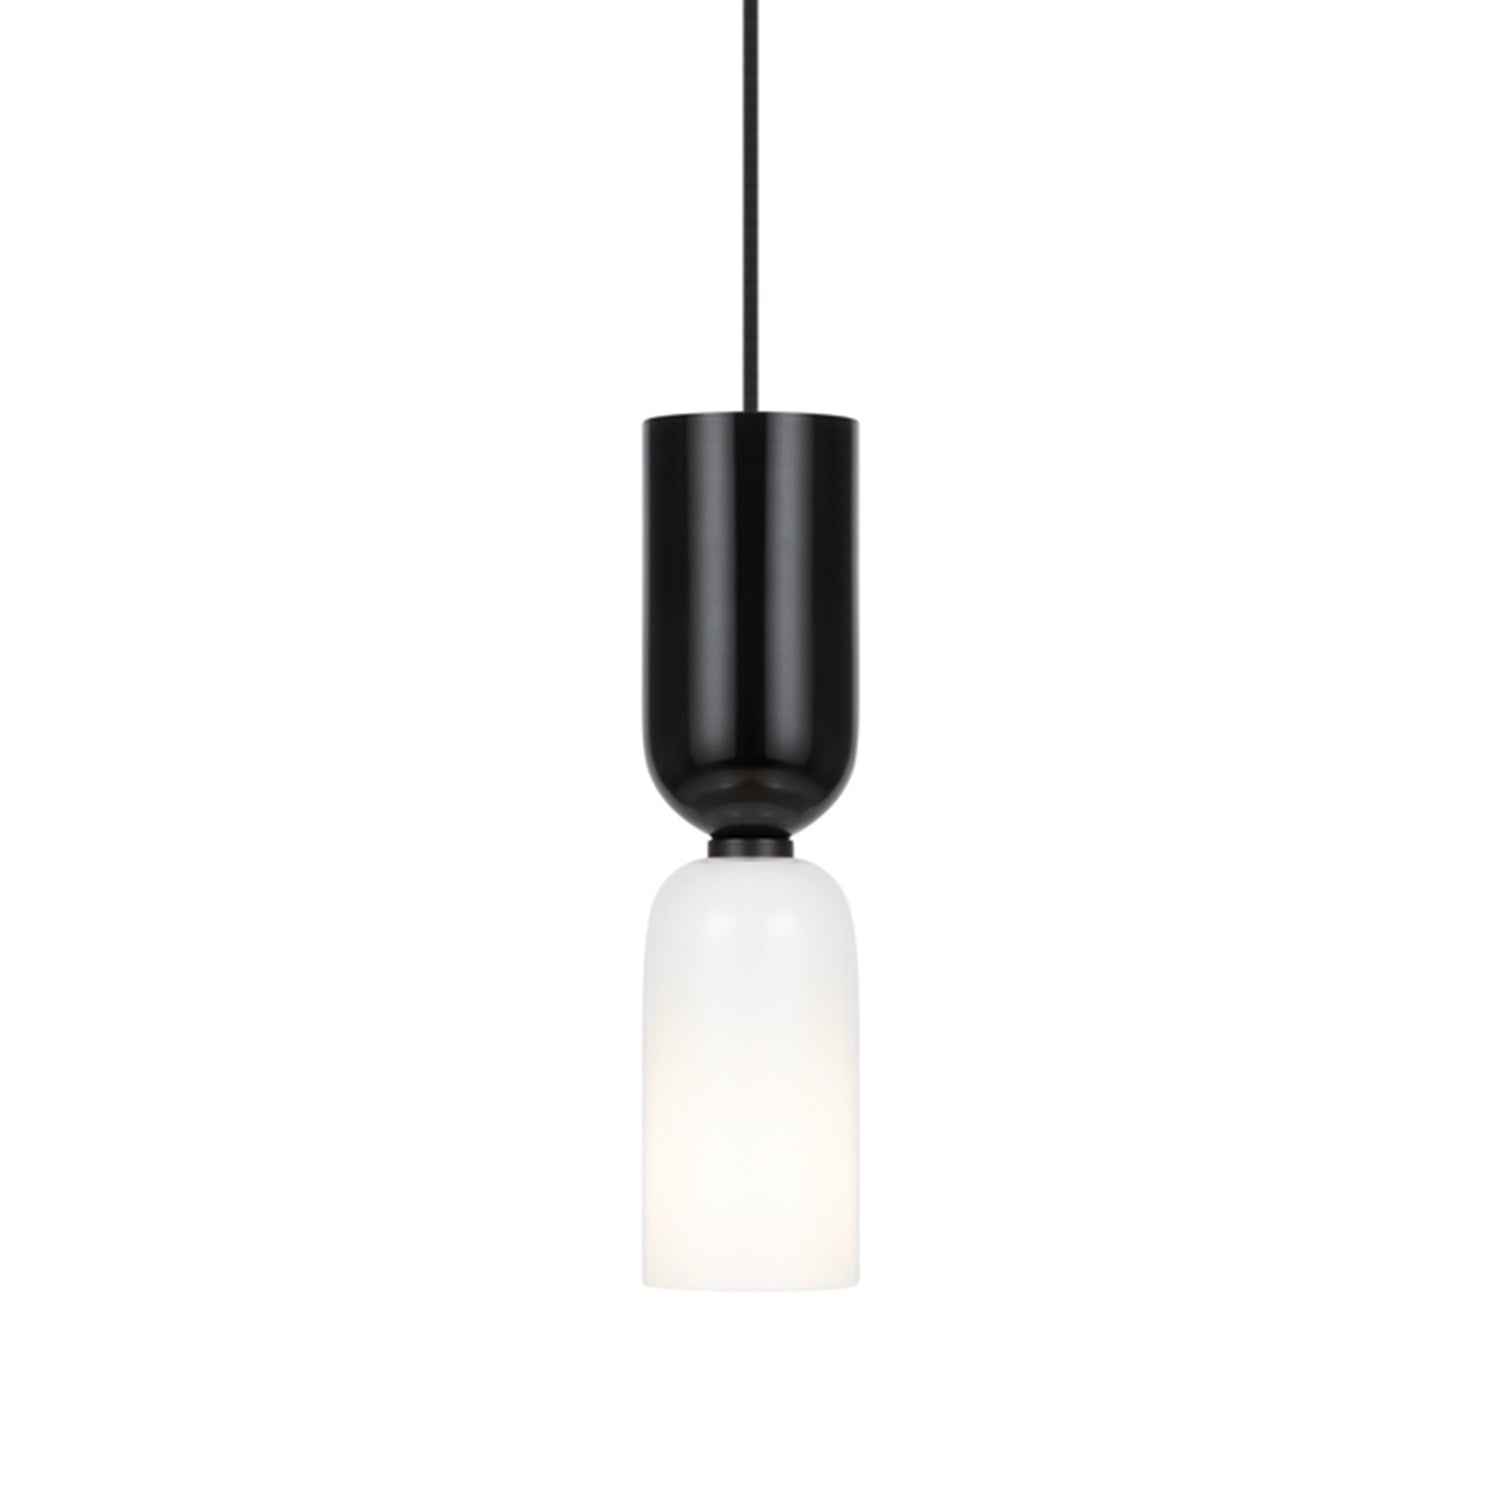 MEMORY - Two-tone pendant light in steel and glass